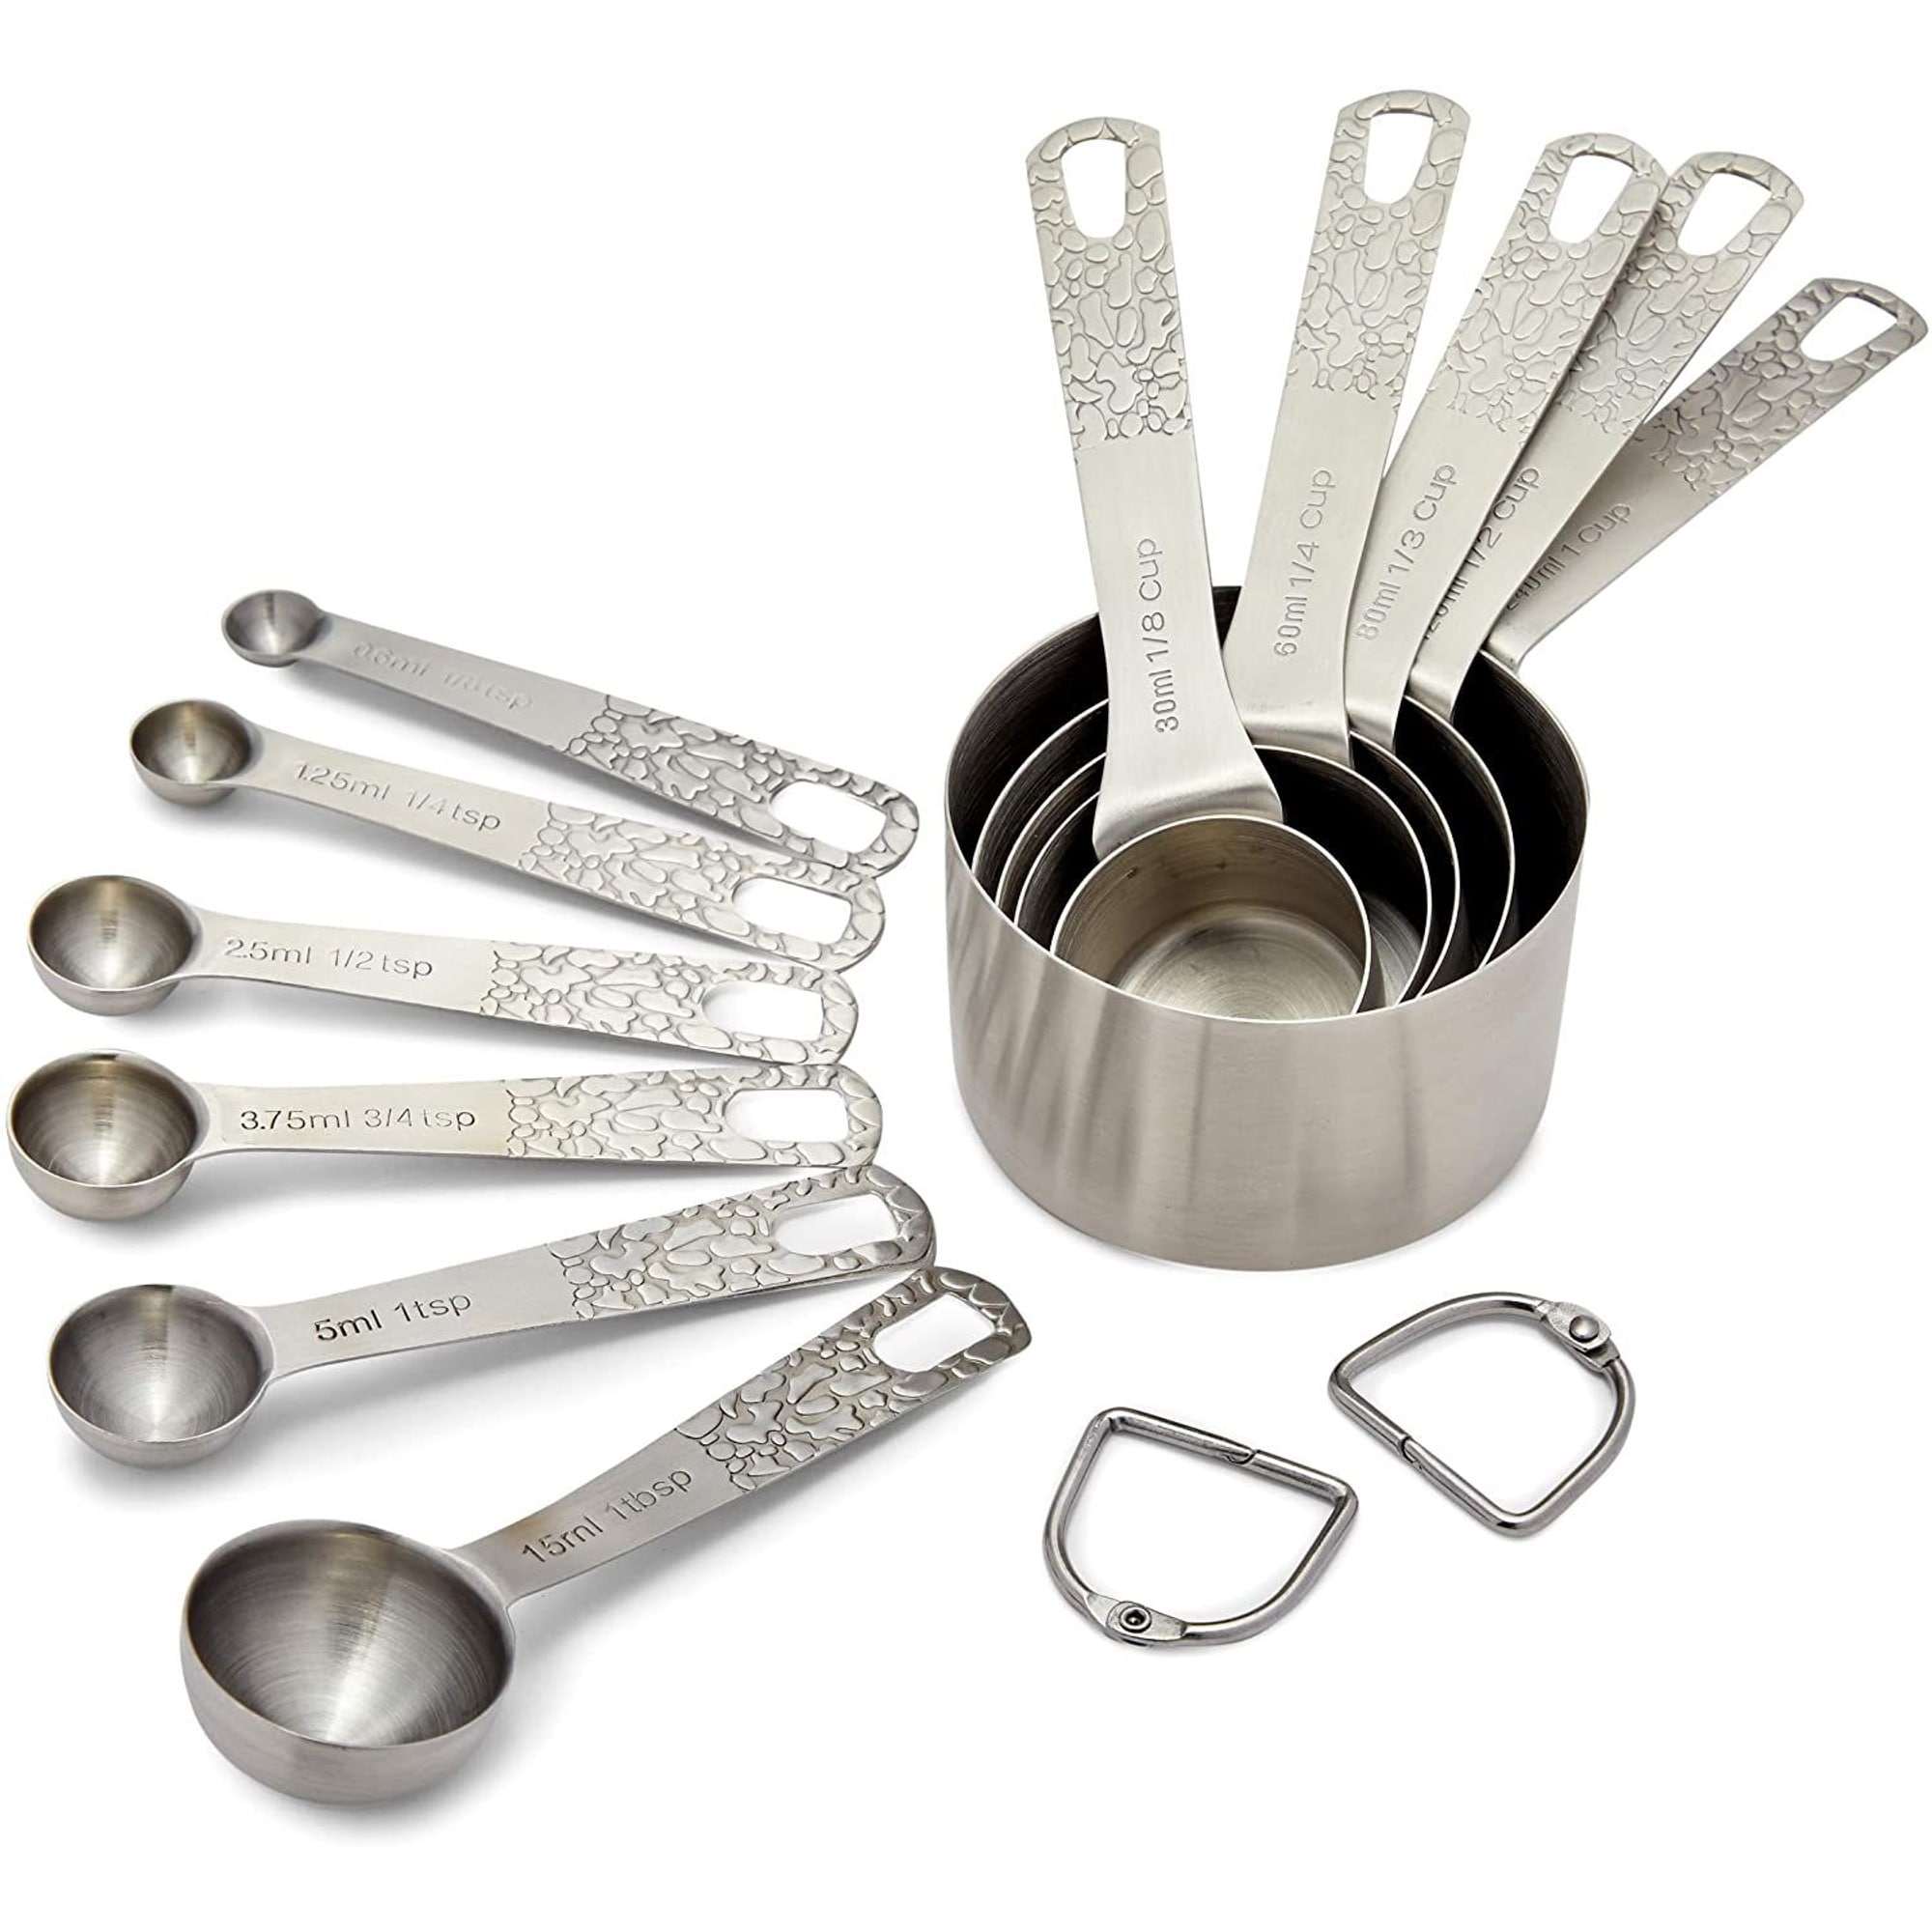 https://ak1.ostkcdn.com/images/products/is/images/direct/b4313a3fe7ec42c3c64563c86efbe6abedb0e5cb/Stainless-Steel-Measuring-Cup-and-Spoon-Set%2C-US-and-Metric-Measurements-%2811-Sizes%29.jpg